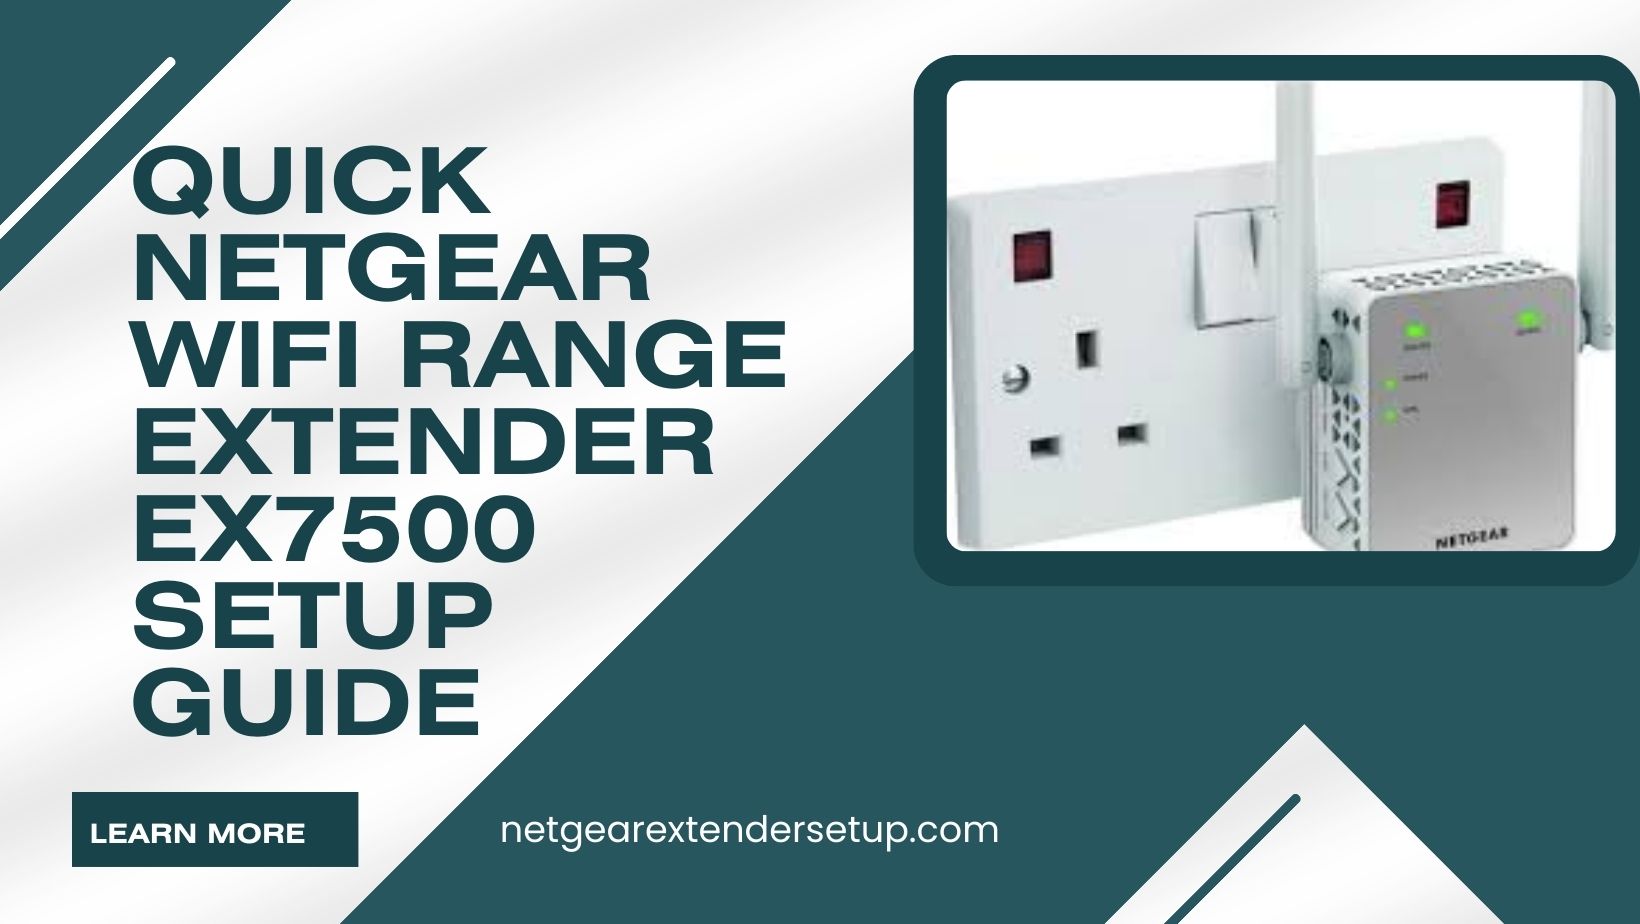 You are currently viewing Quick Netgear WiFi range extender EX7500 Setup Guide